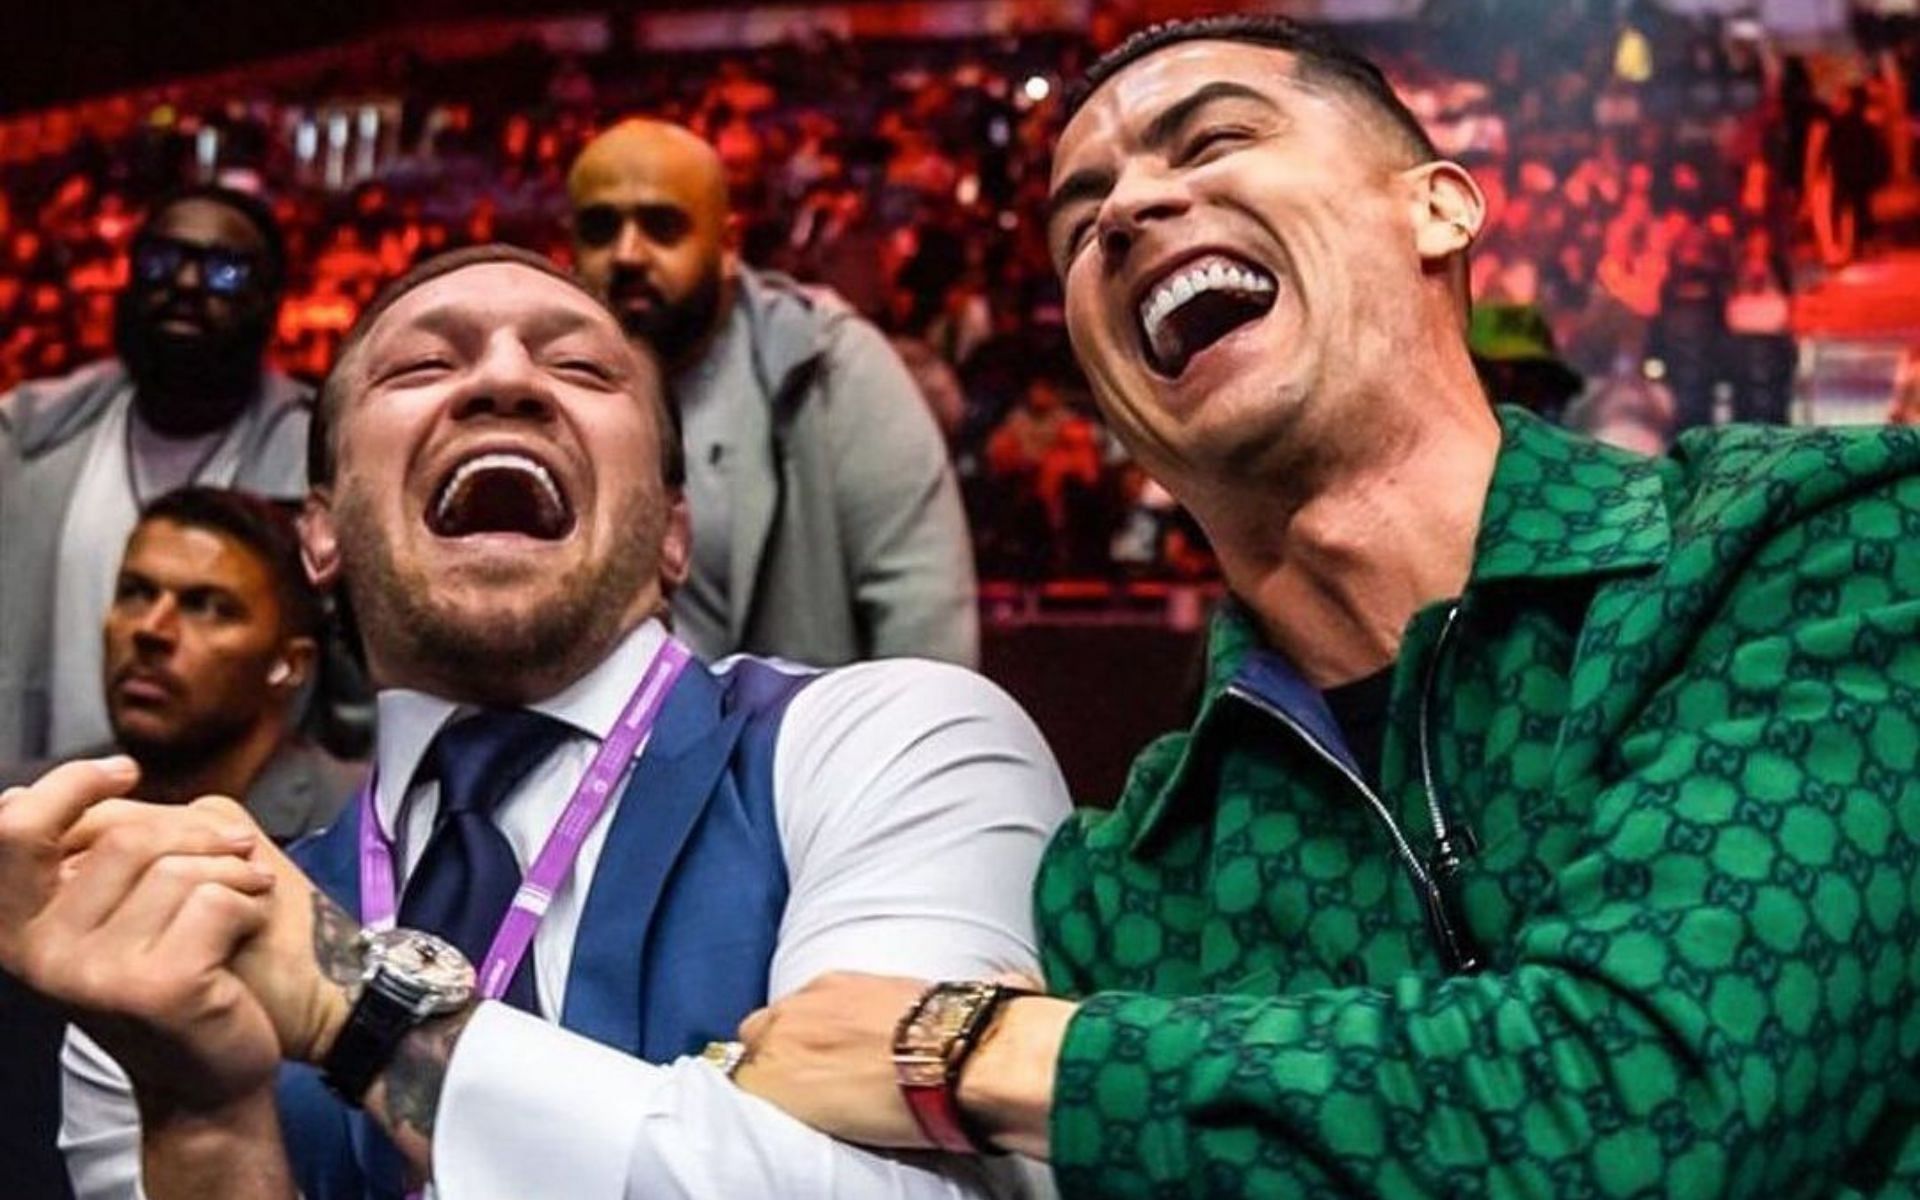 Conor McGregor (left) and Cristiano Ronaldo (right) sitting together ringside (Image courtesy @cristiano on Instagram)